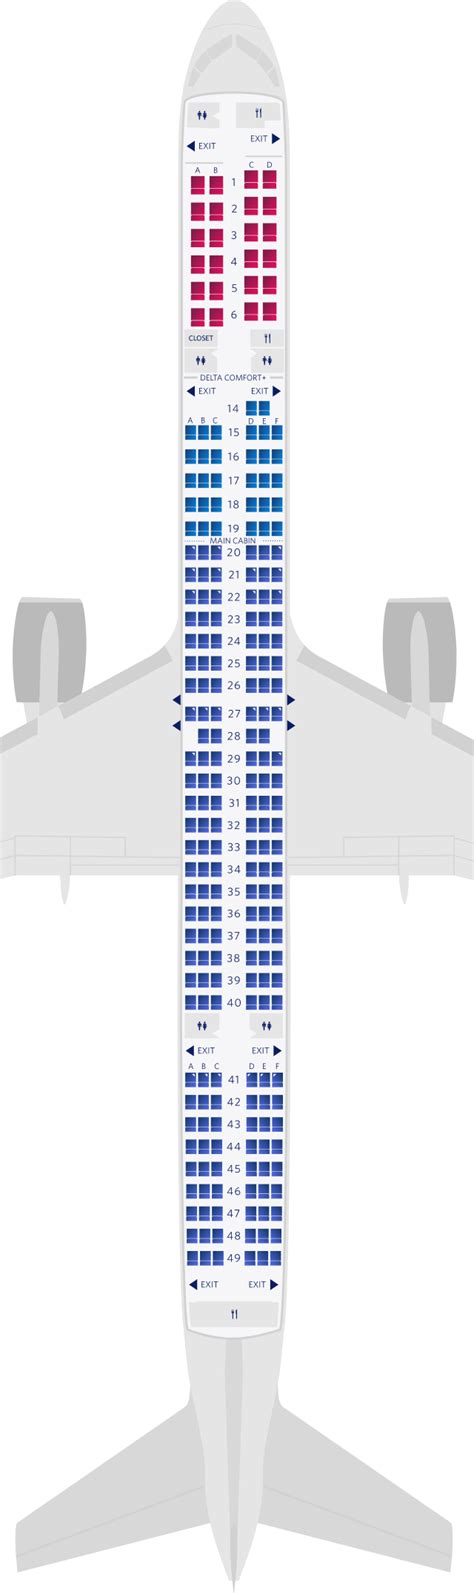 Nov 23, 2019 · Yes. Detailed seat map Delta Air Lines Boeing B757 300 (75Y). Find the best airplanes seats, information on legroom, recline and in-flight entertainment using our detailed online seating charts. 